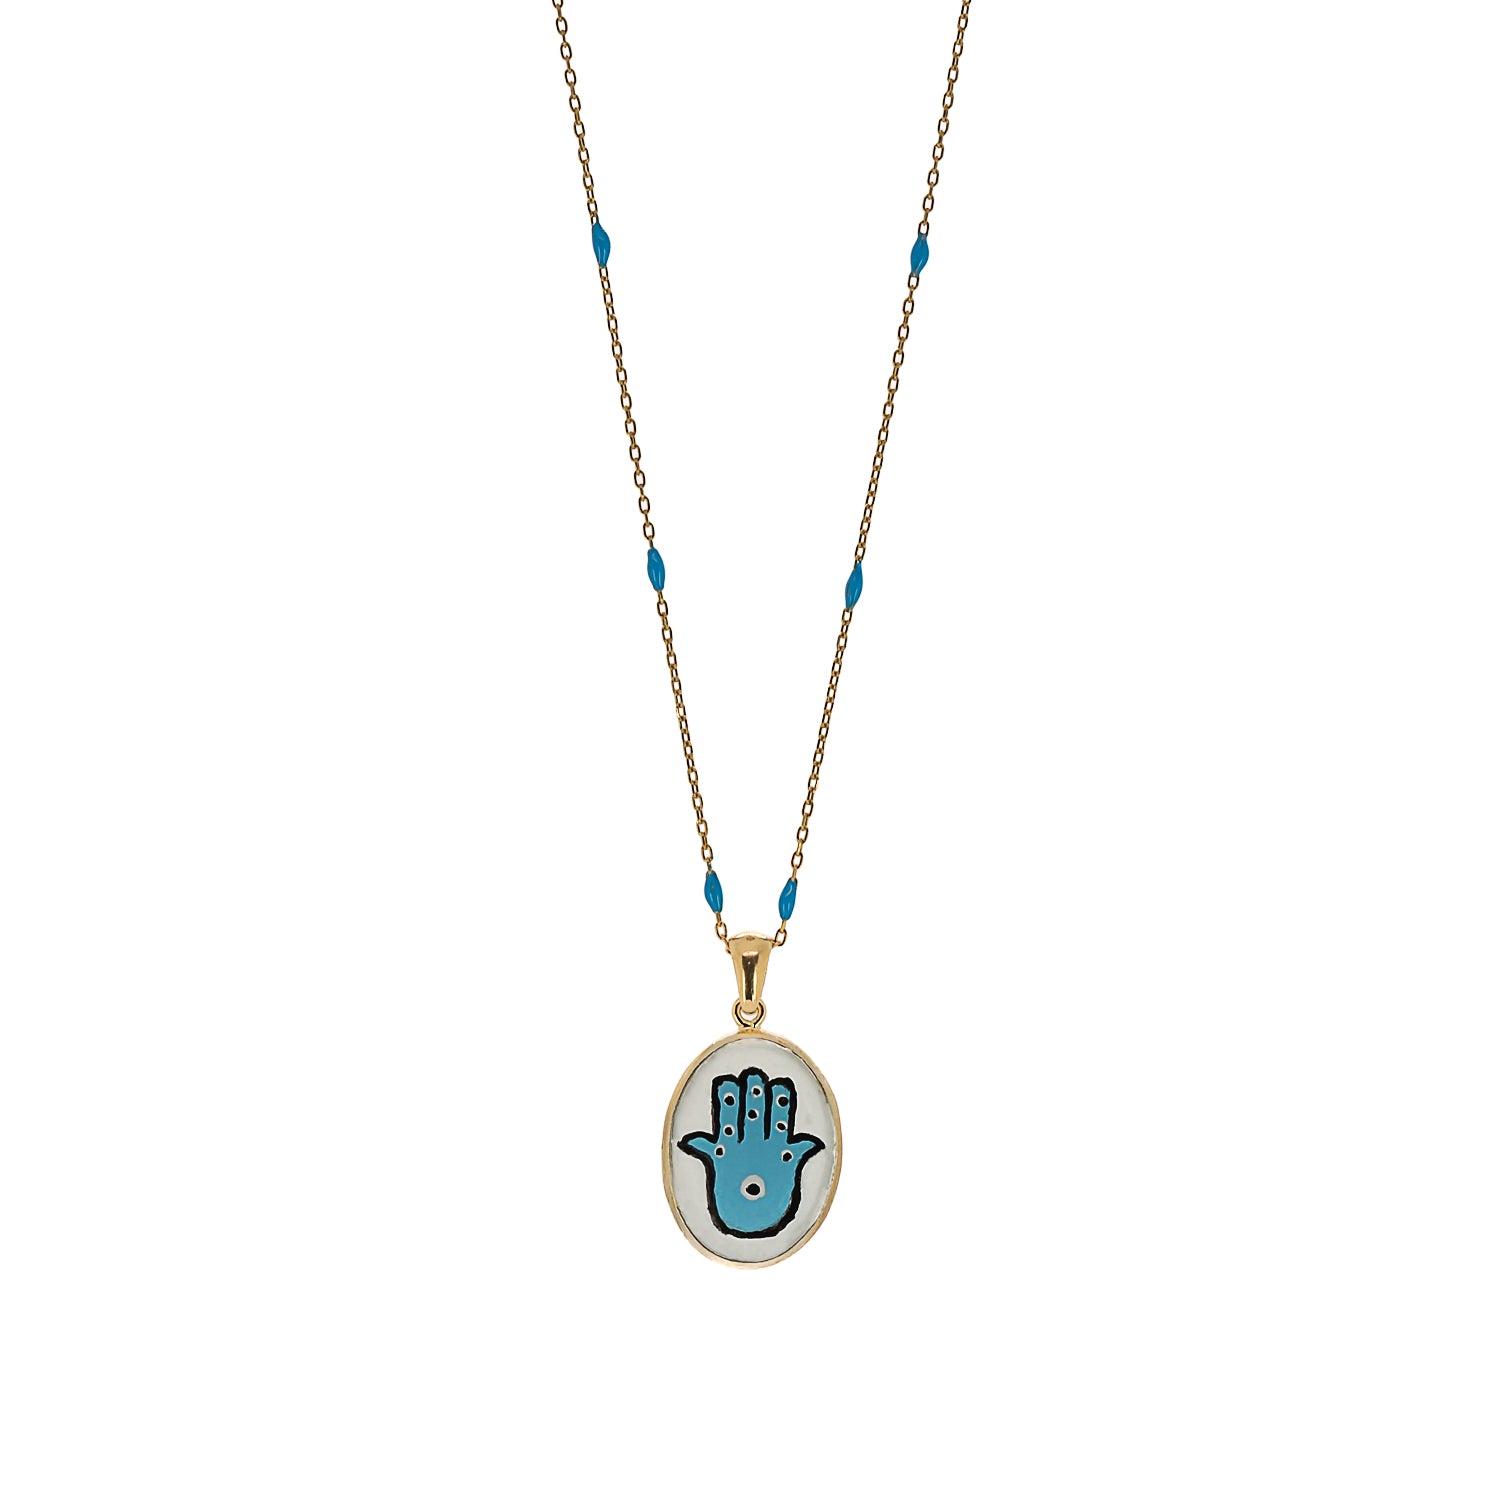 Detailed Handcrafted Hamsa Hand Necklace - A Unique and Symbolic Piece.